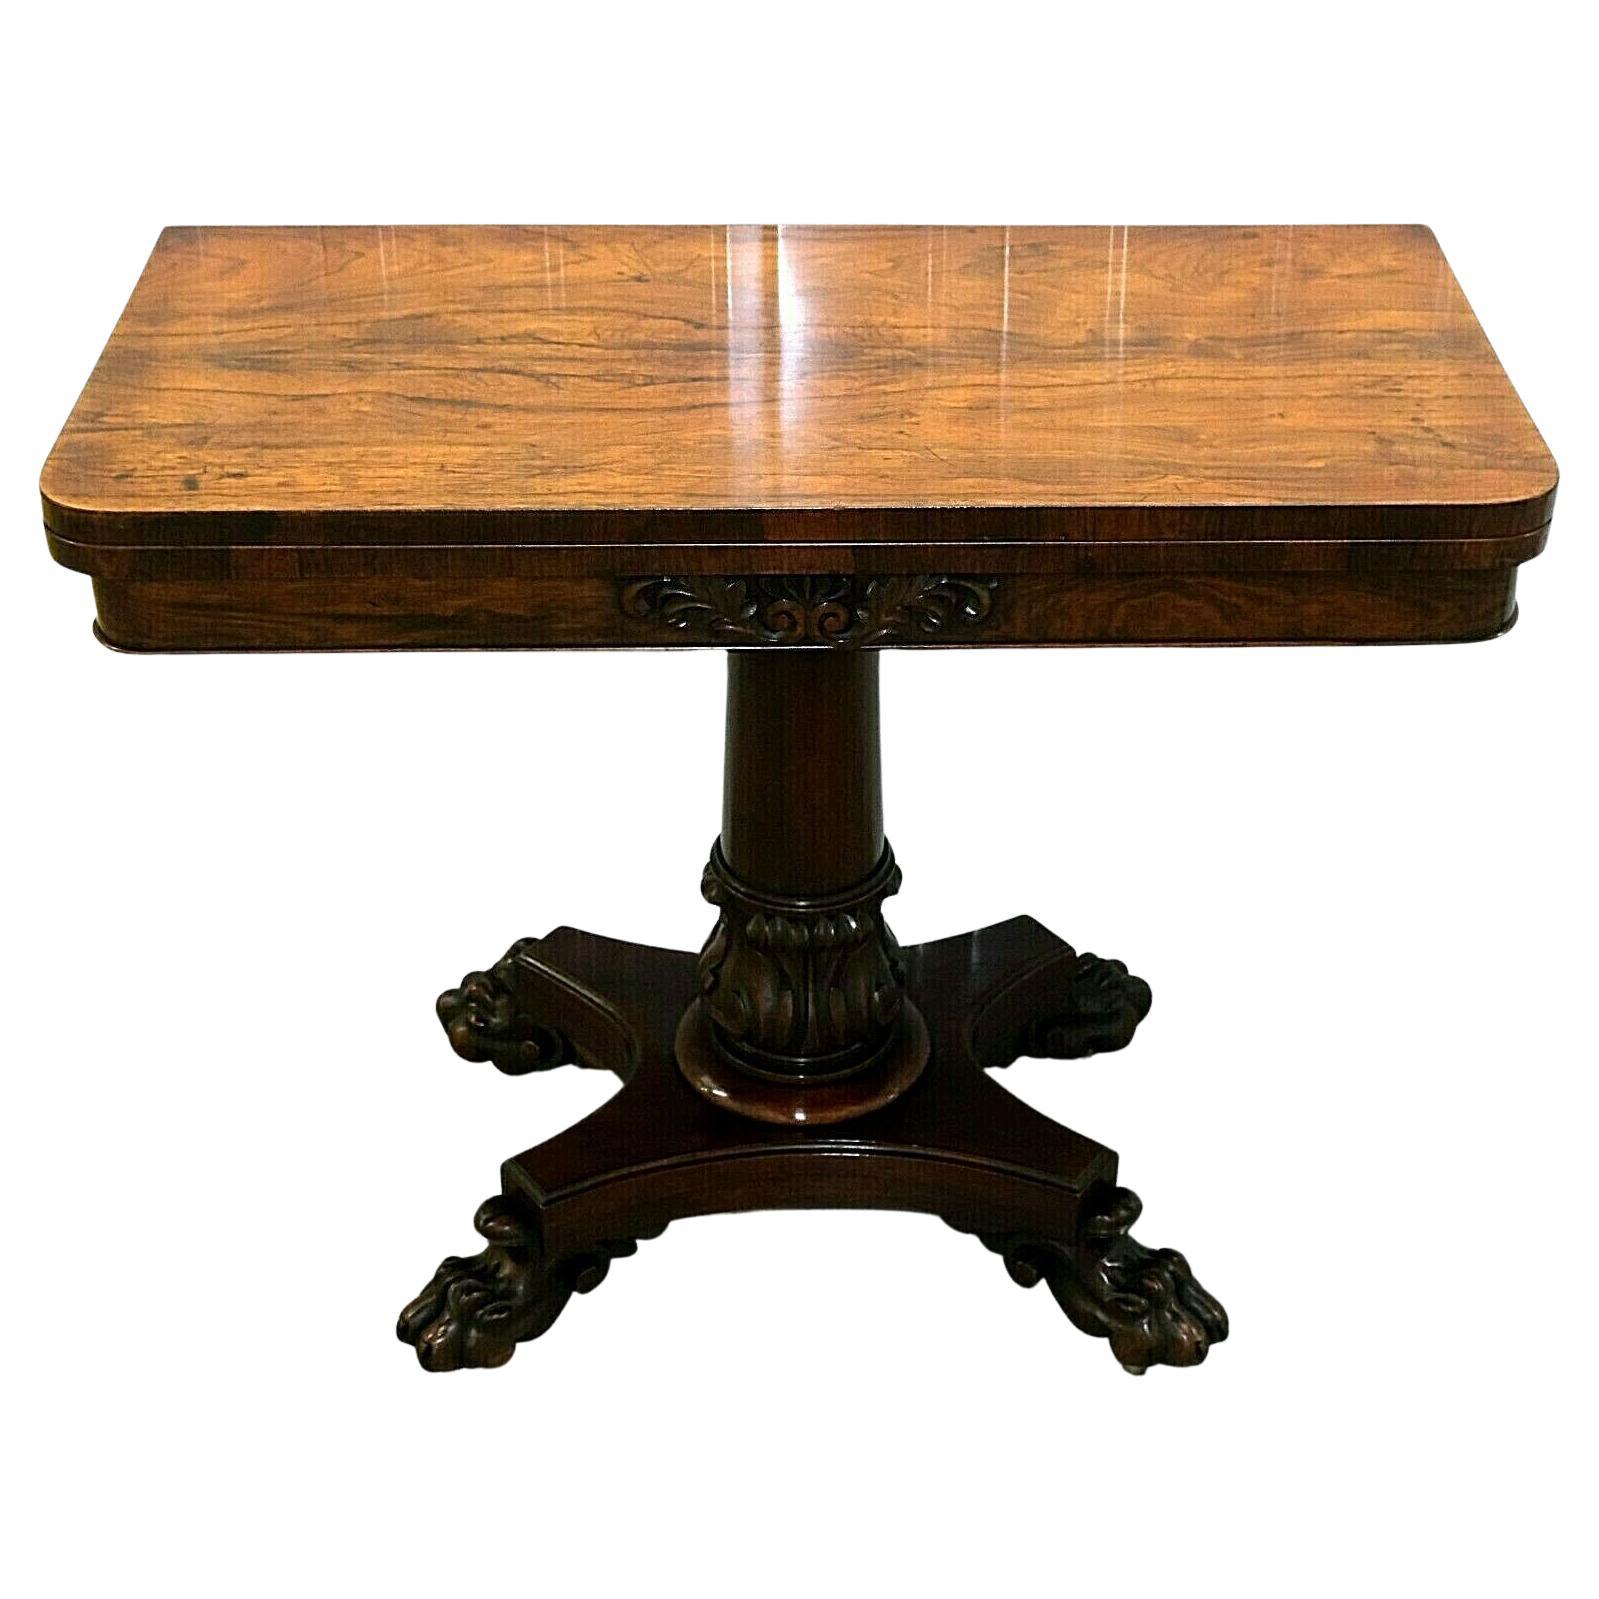 Regency Hardwood Turn over Top Card Table on Stunning Paw Feet & Casters